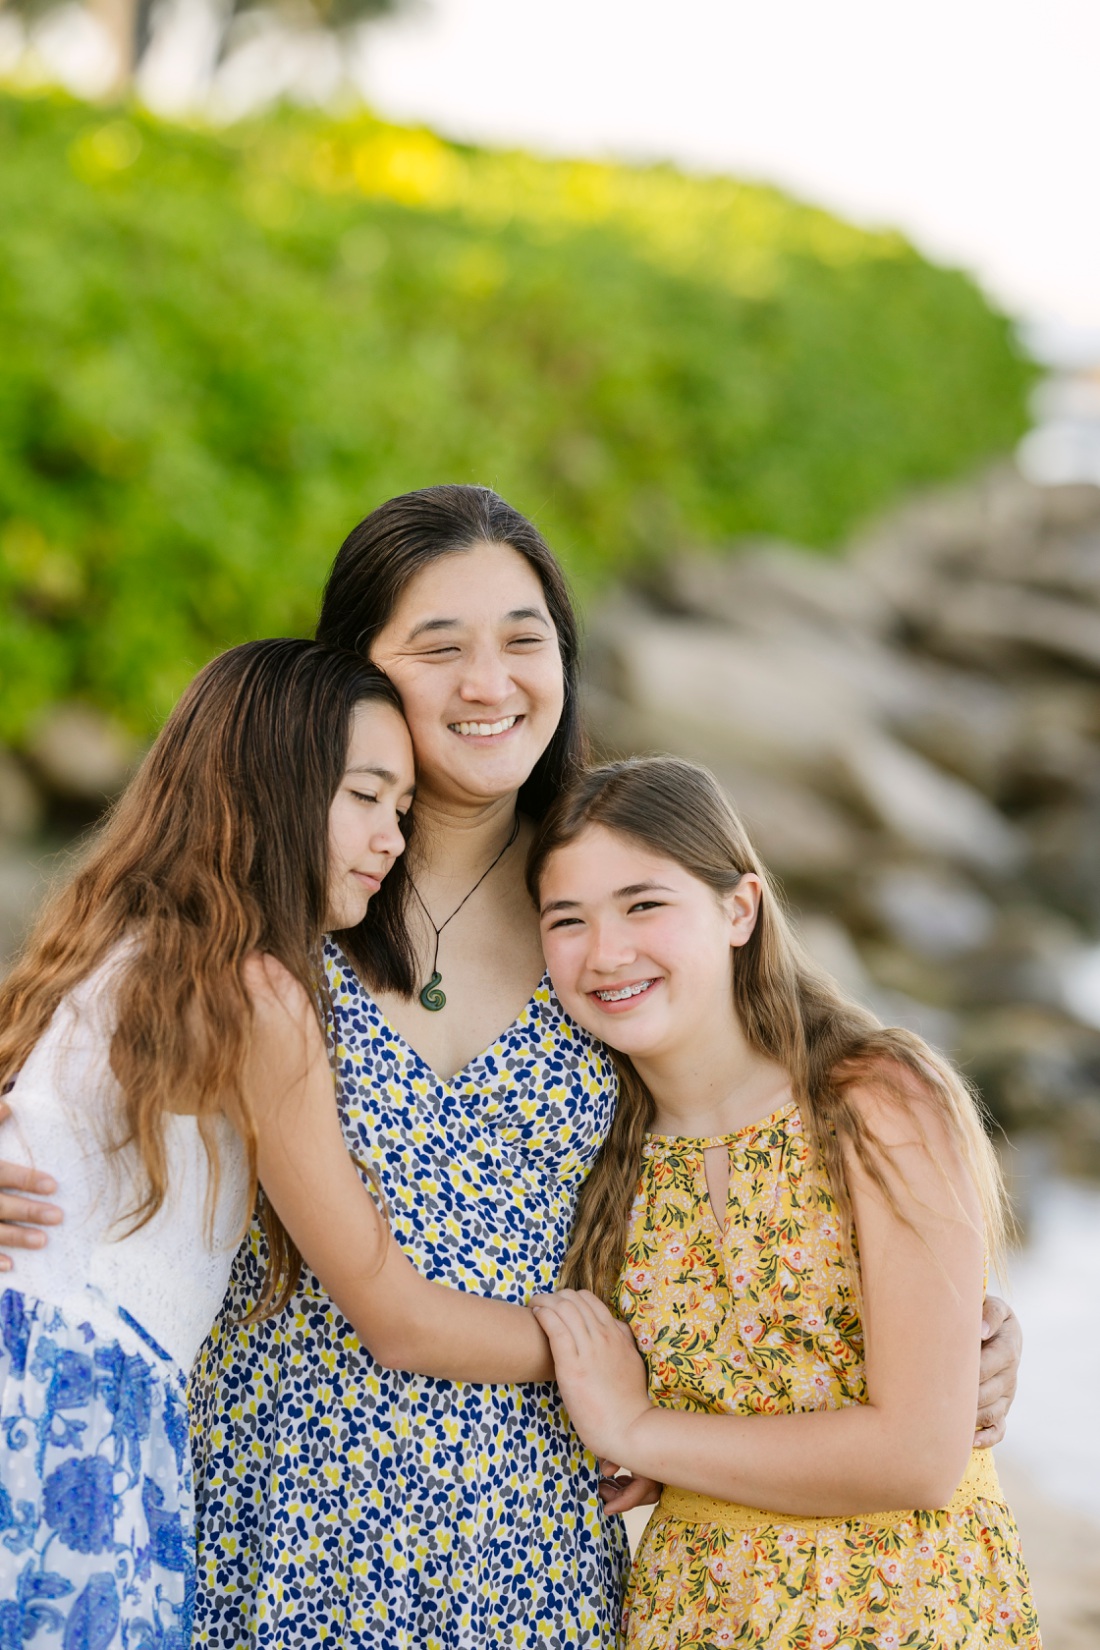 mom and daughters share a hug at the beach in hawaii during a family photoshoot